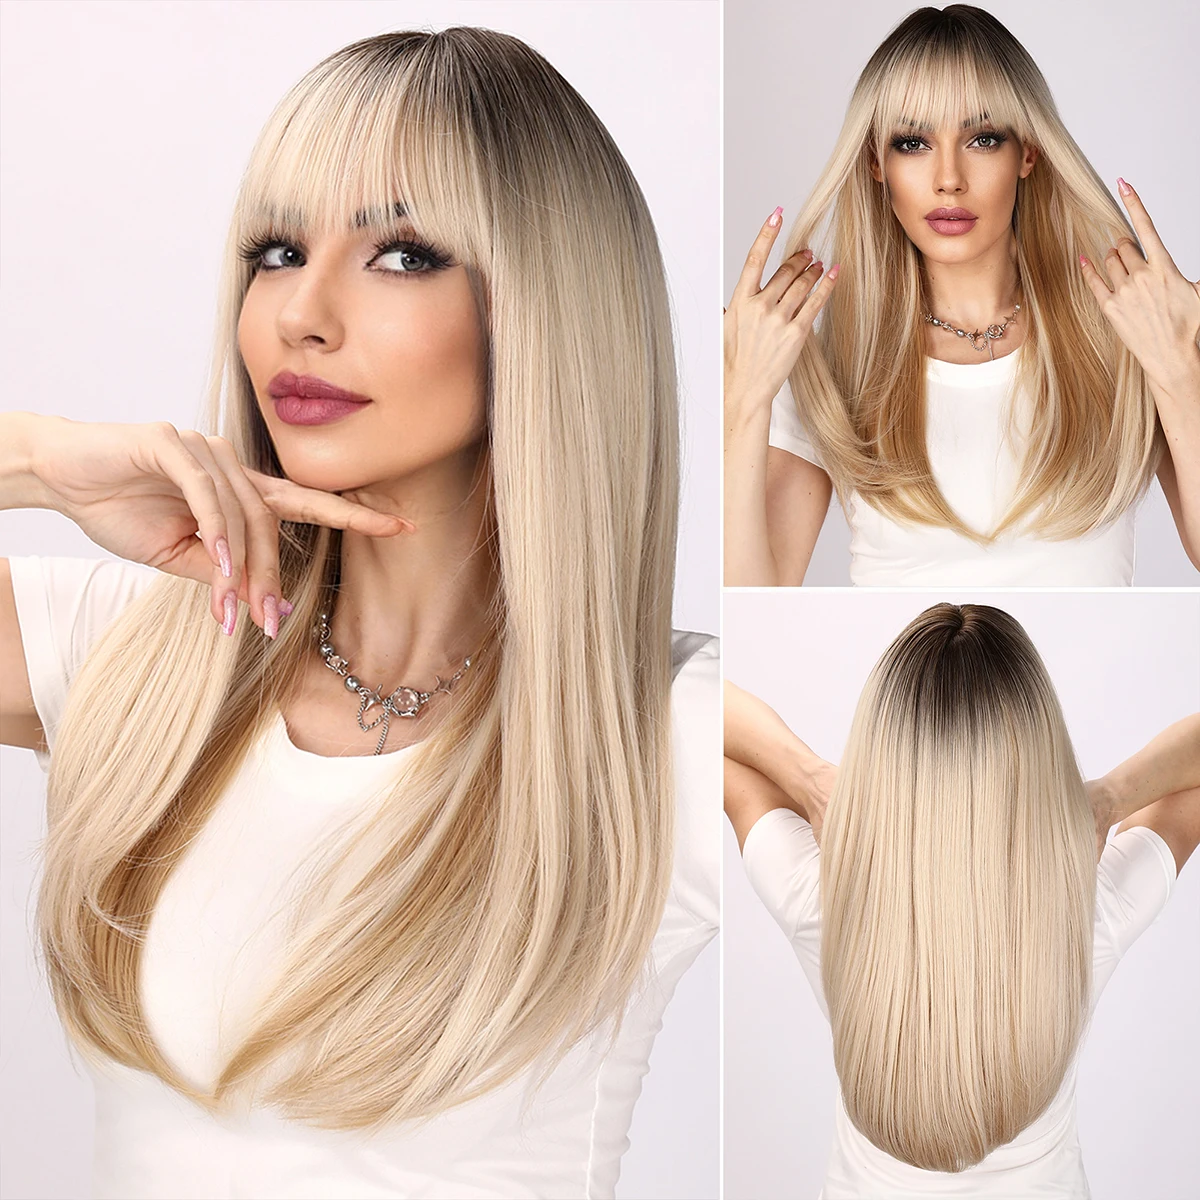 Light Gold Blonde Synthetic Wigs With Flat Bangs for Women Long Straight Hair Wig Natural Cosplay Party Heat Resistant Hair sylvia long wavy brown wig synthetic full machine made wig with bangs brown wigs for women ombre blonde none lace wig 22 inches